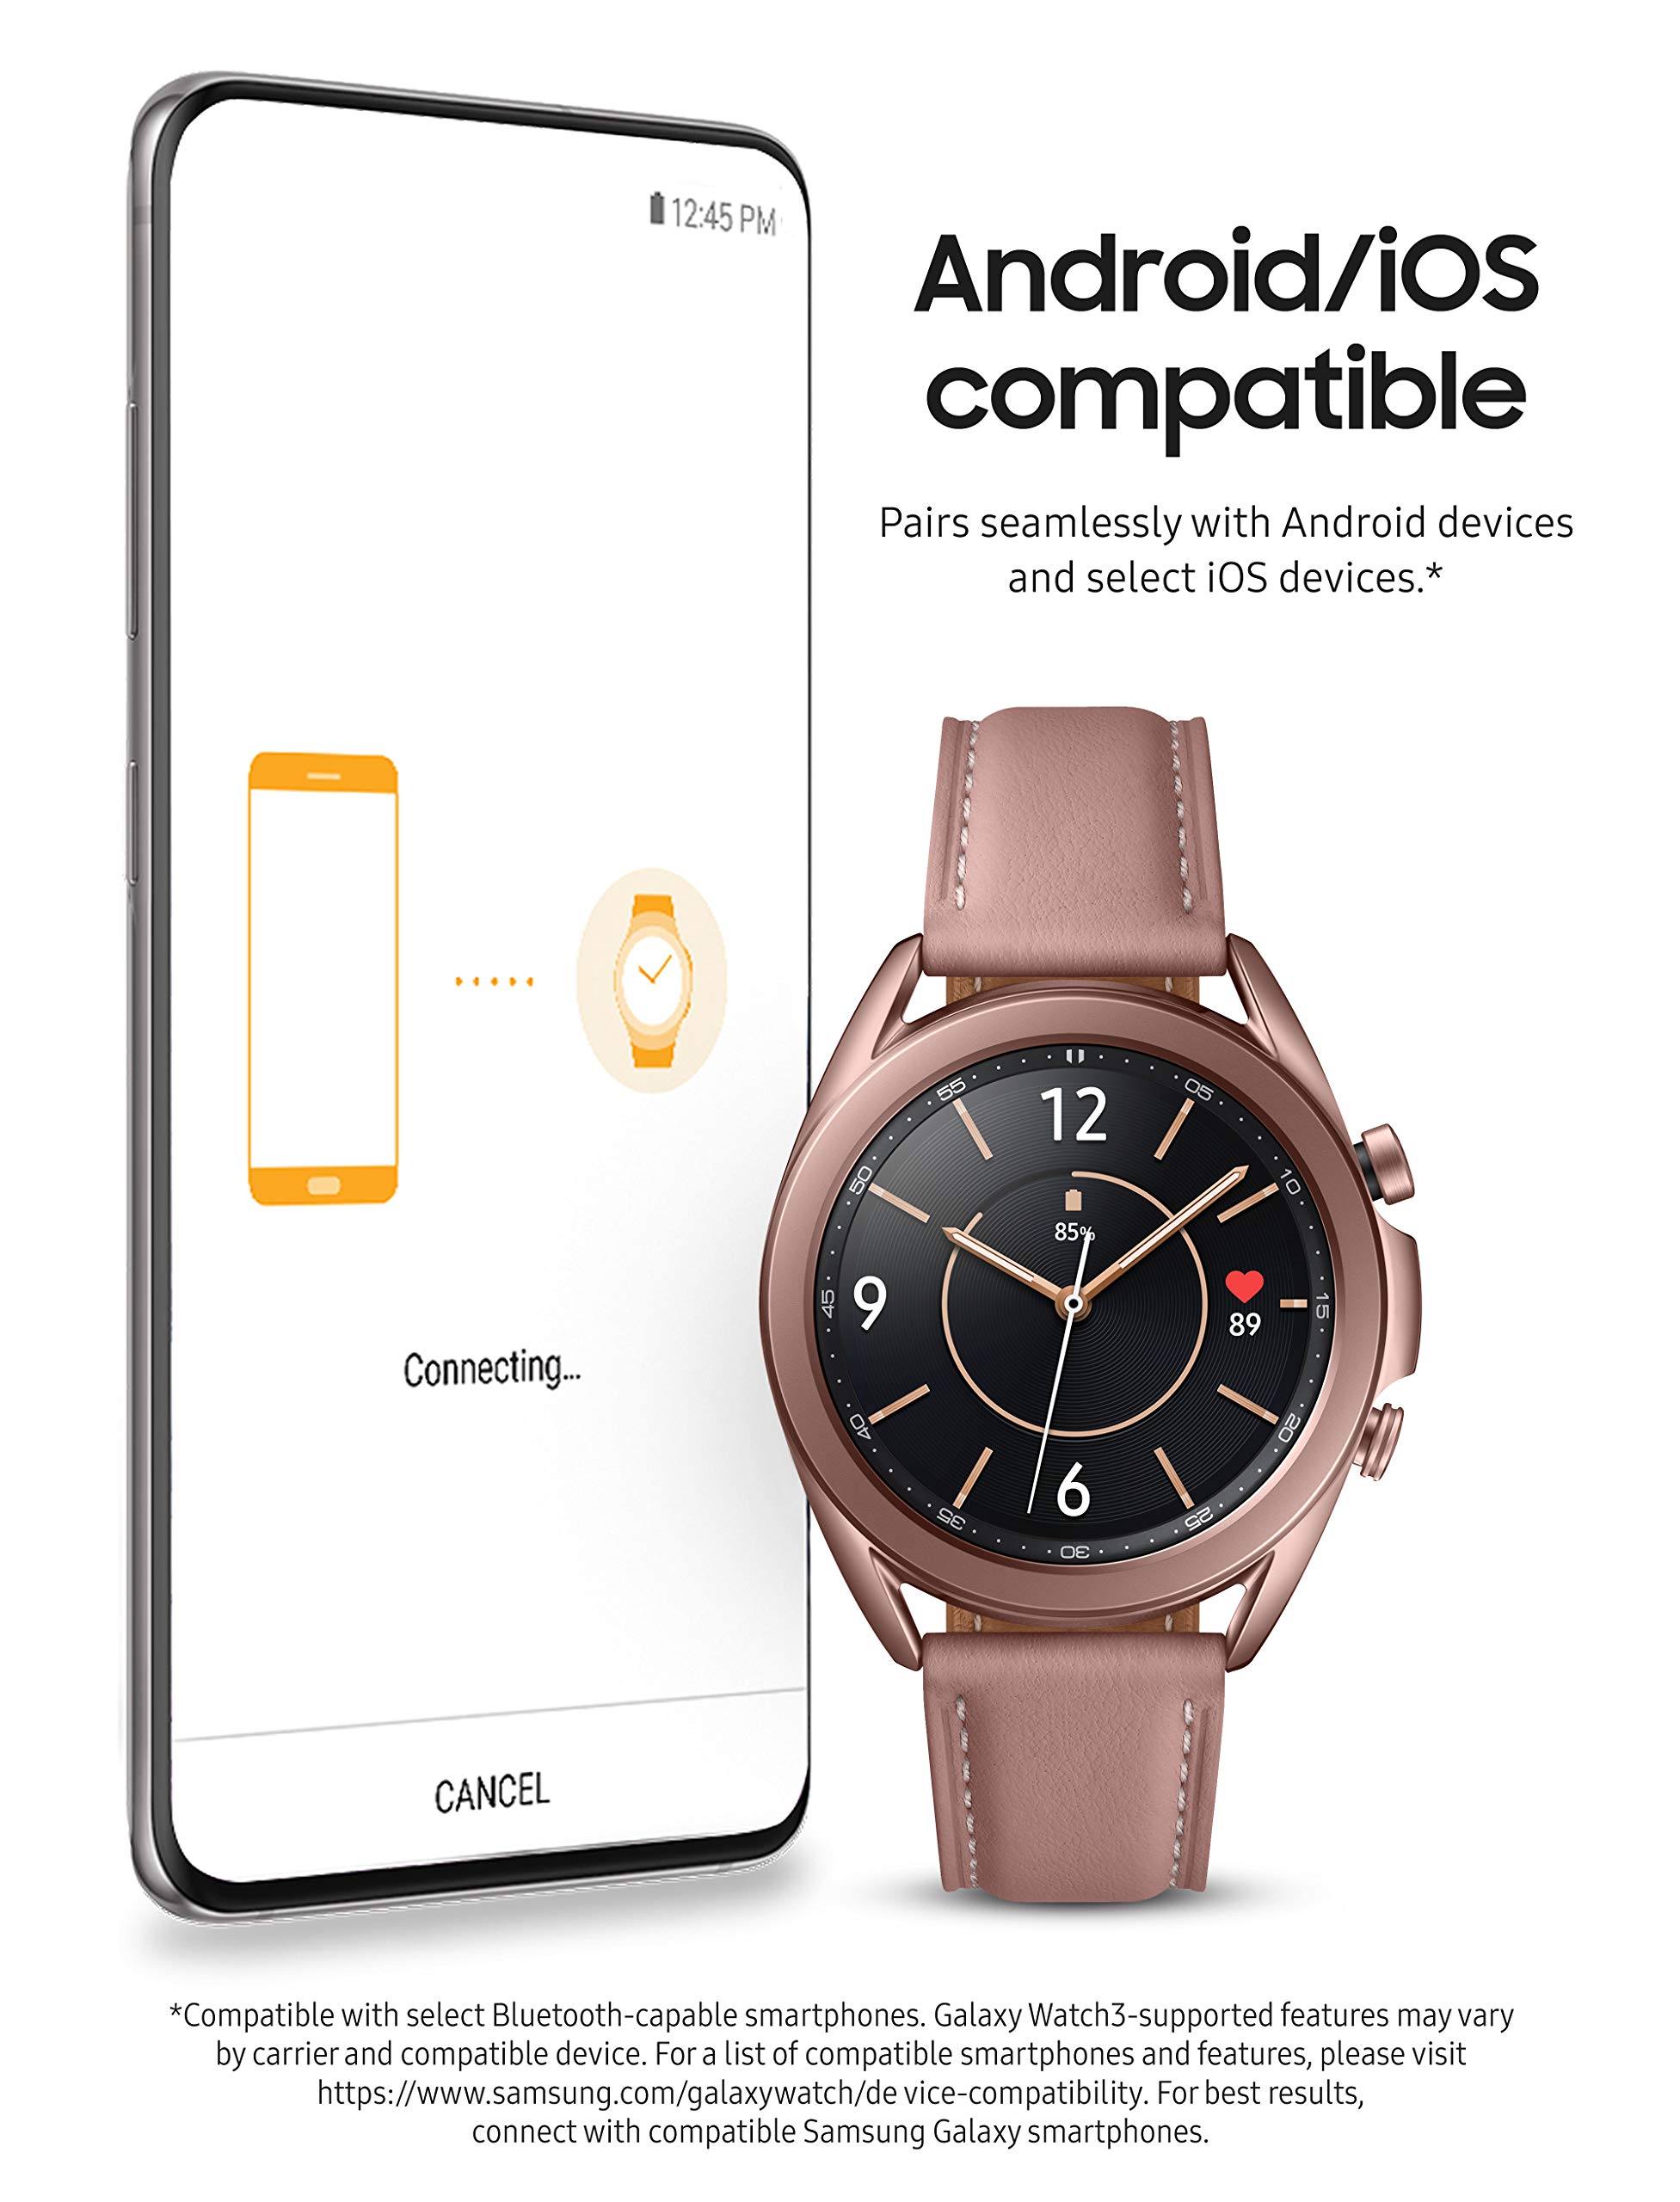 SAMSUNG Galaxy Watch 3 (41mm, GPS, Bluetooth) Smart Watch with Advanced Health Monitoring, Fitness Tracking, and Long Lasting Battery - Mystic Bronze (US Version)